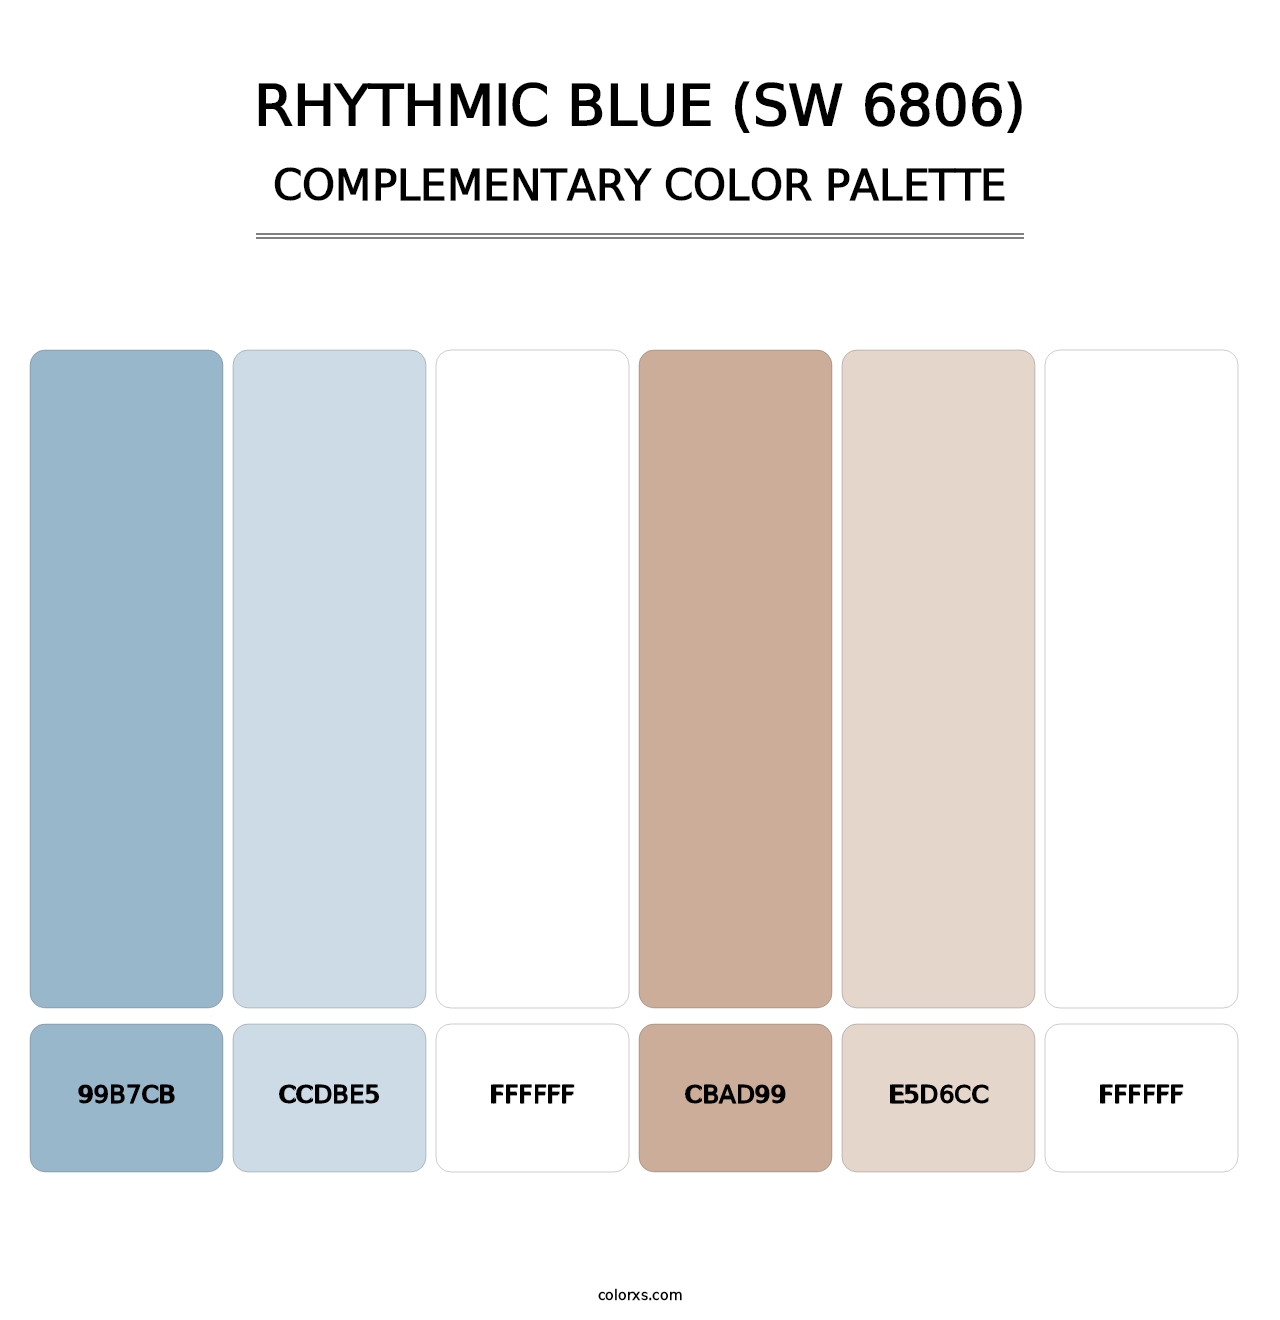 Rhythmic Blue (SW 6806) - Complementary Color Palette